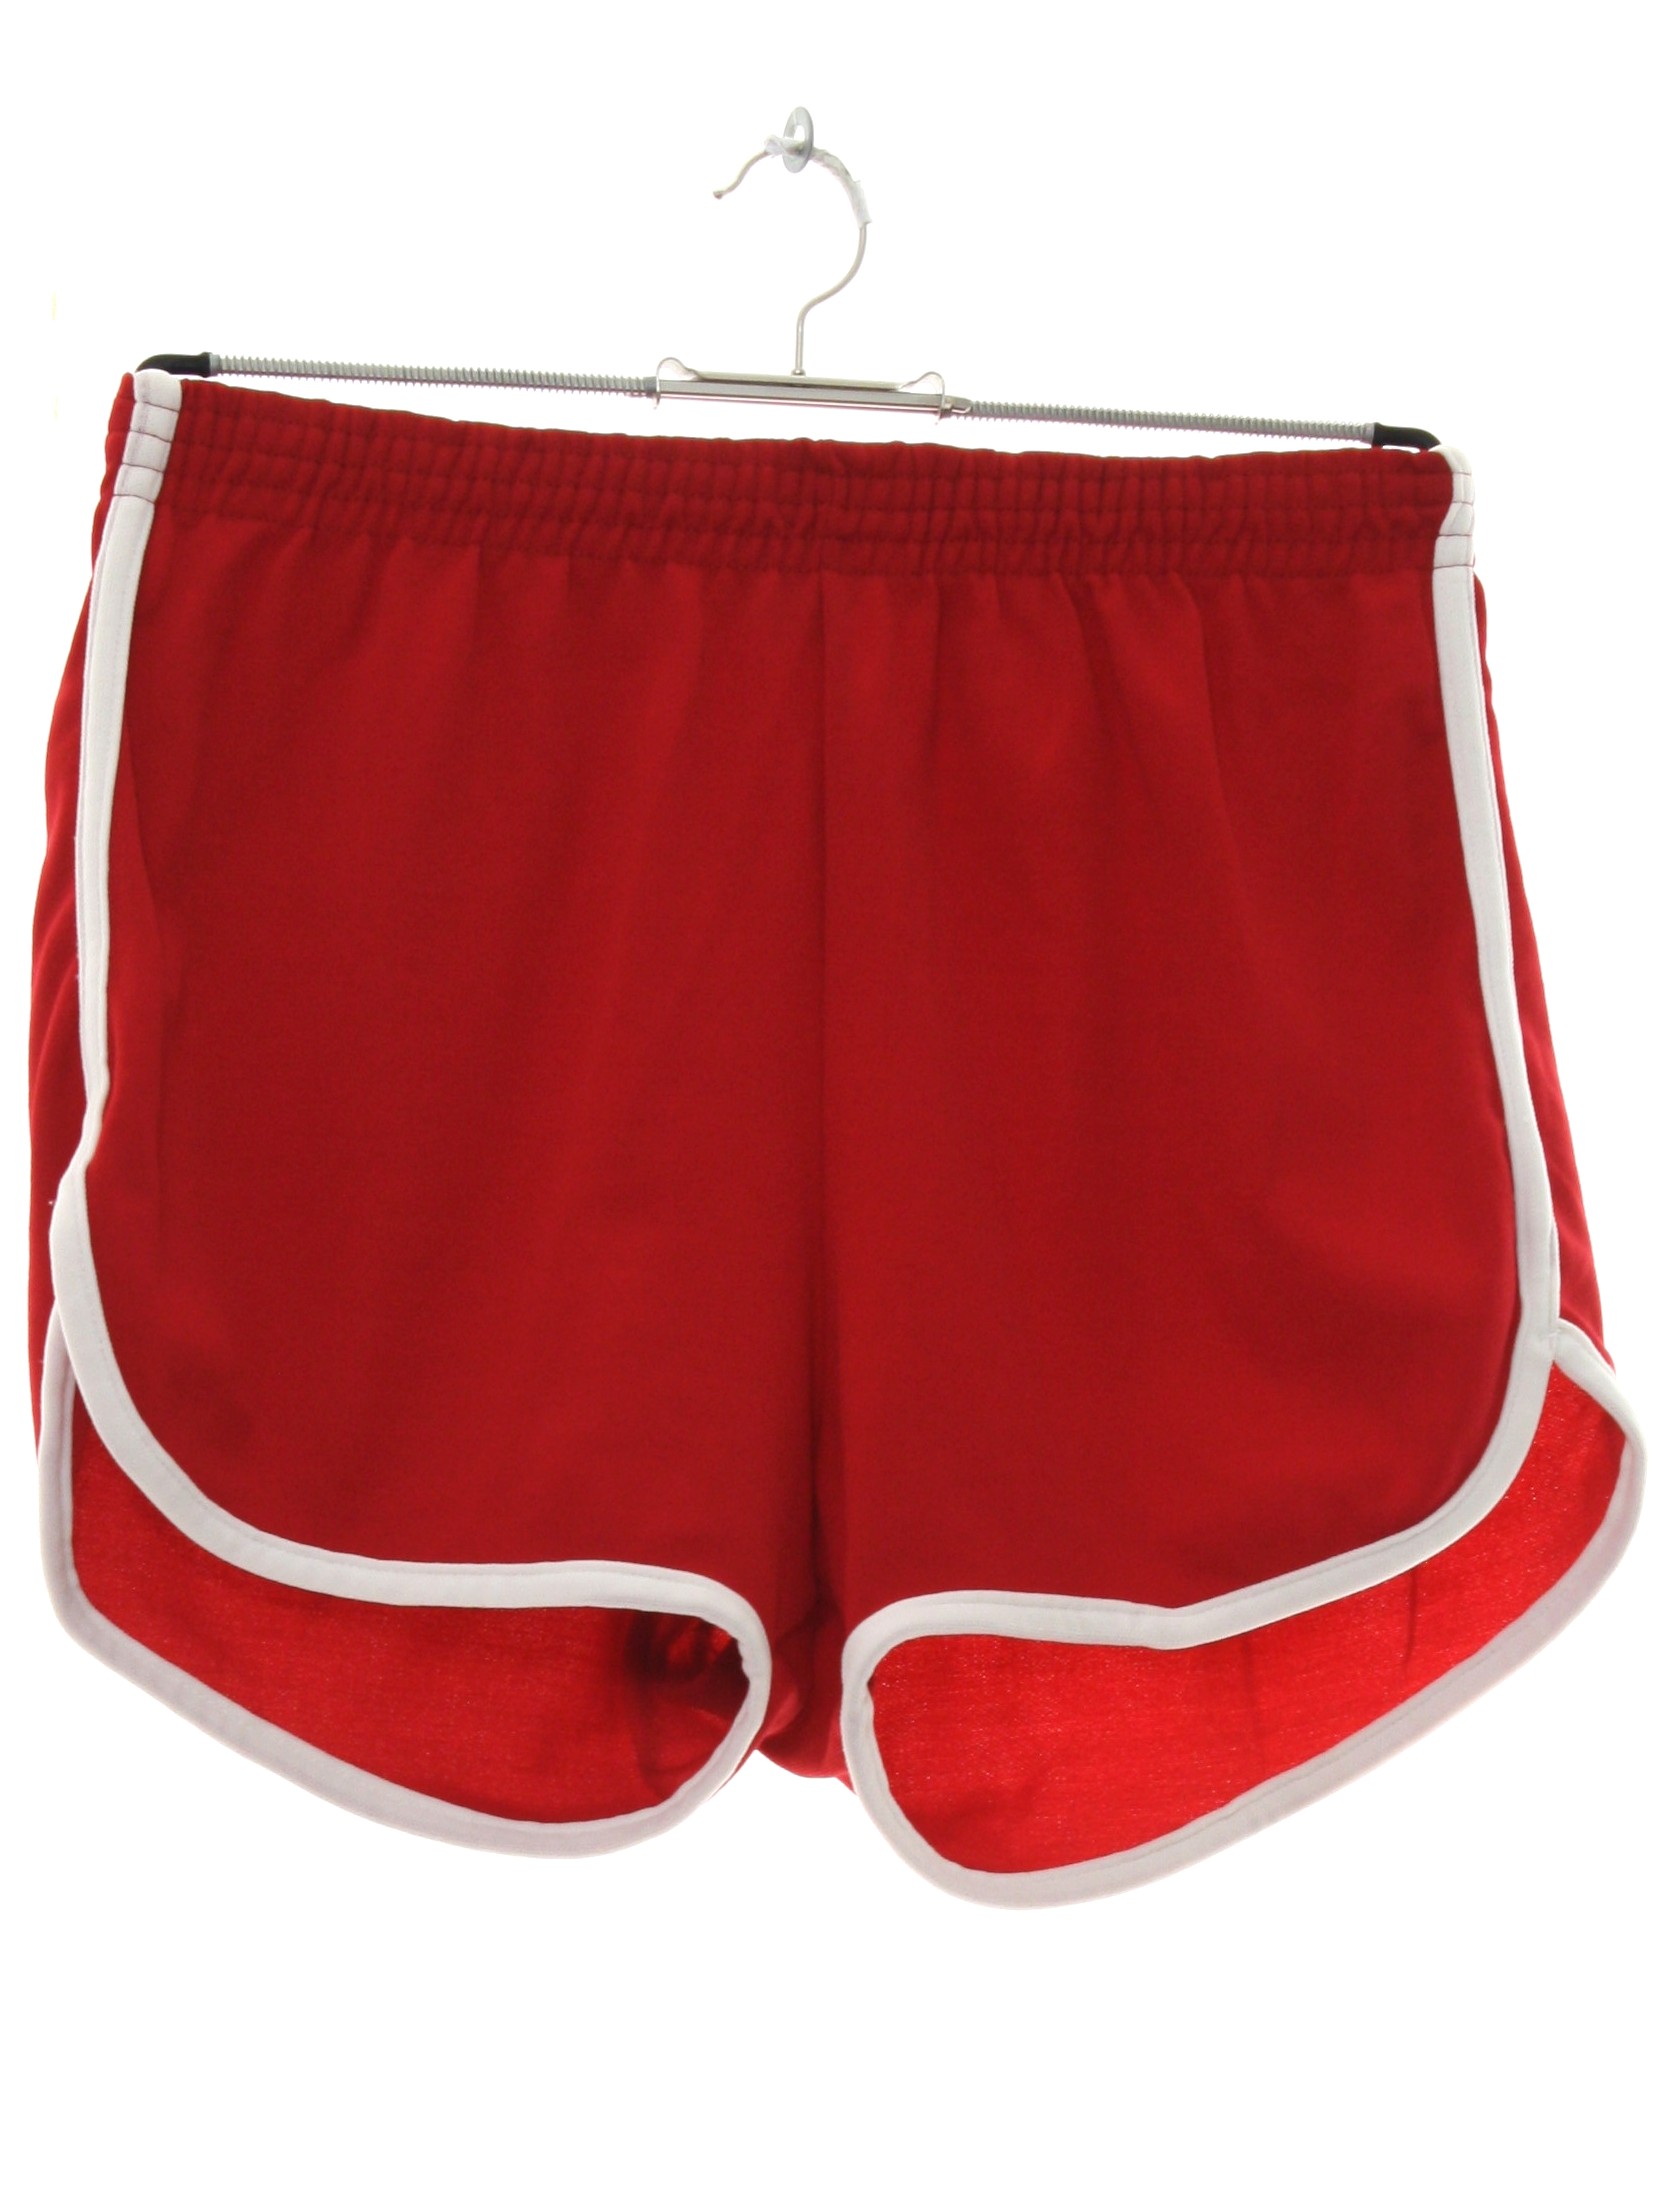 Sears 80's Vintage Shorts: 80s -Sears- Mens red background polyester ...